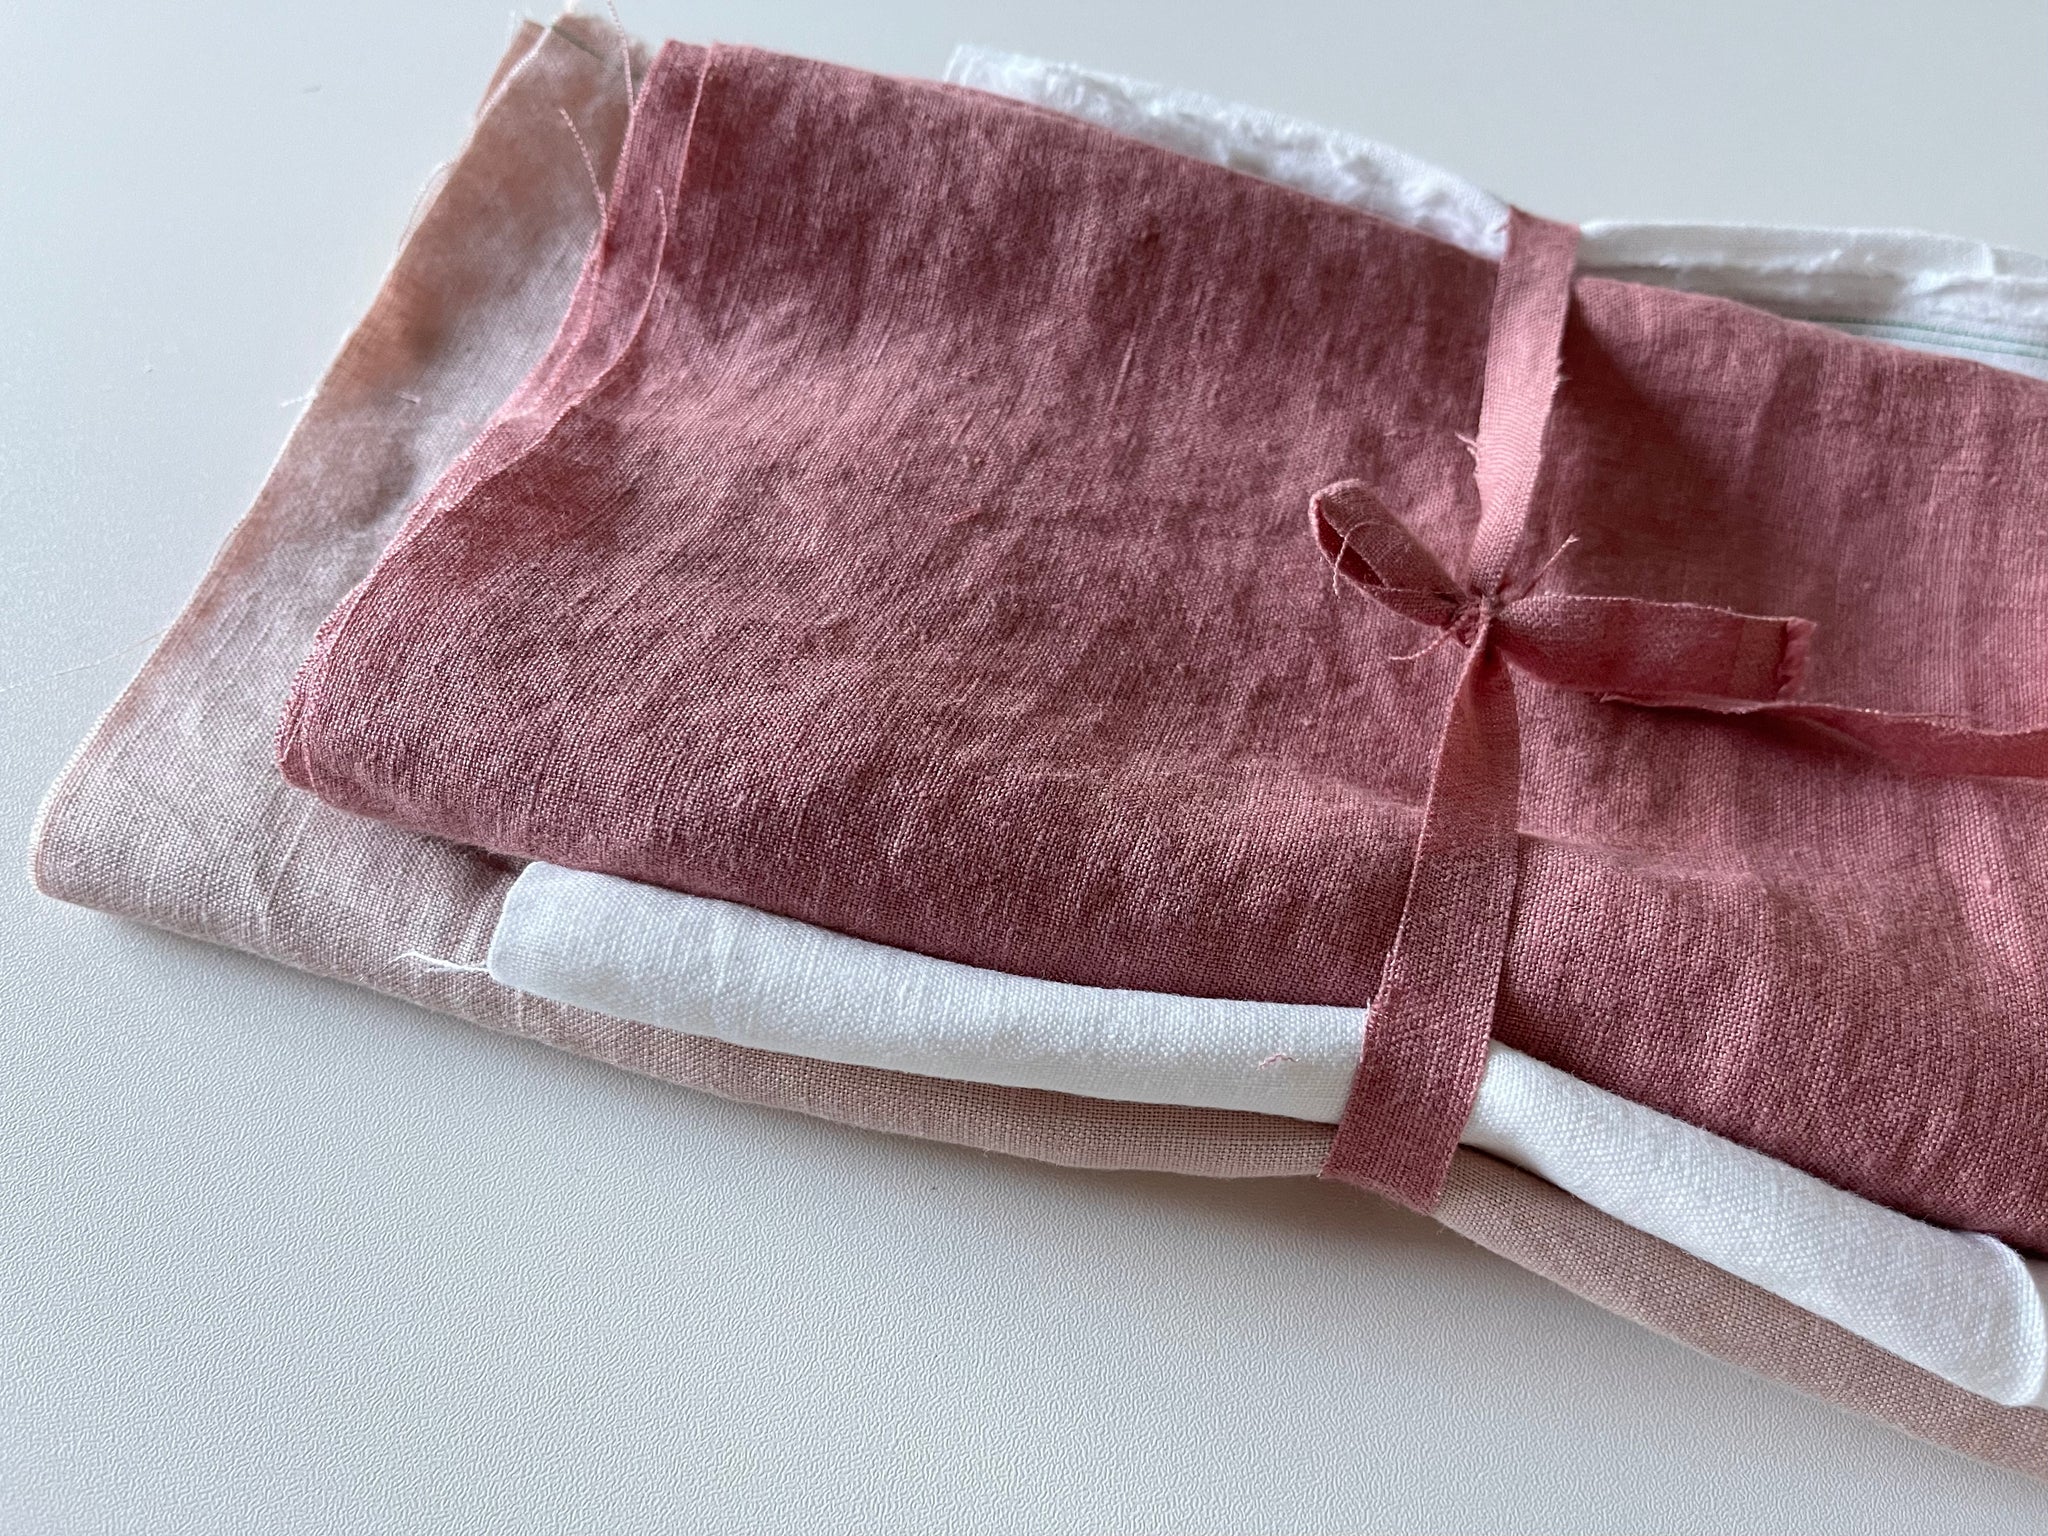 Linen Fabric Remnants - Pure White, Dusty Rose, Old Rose